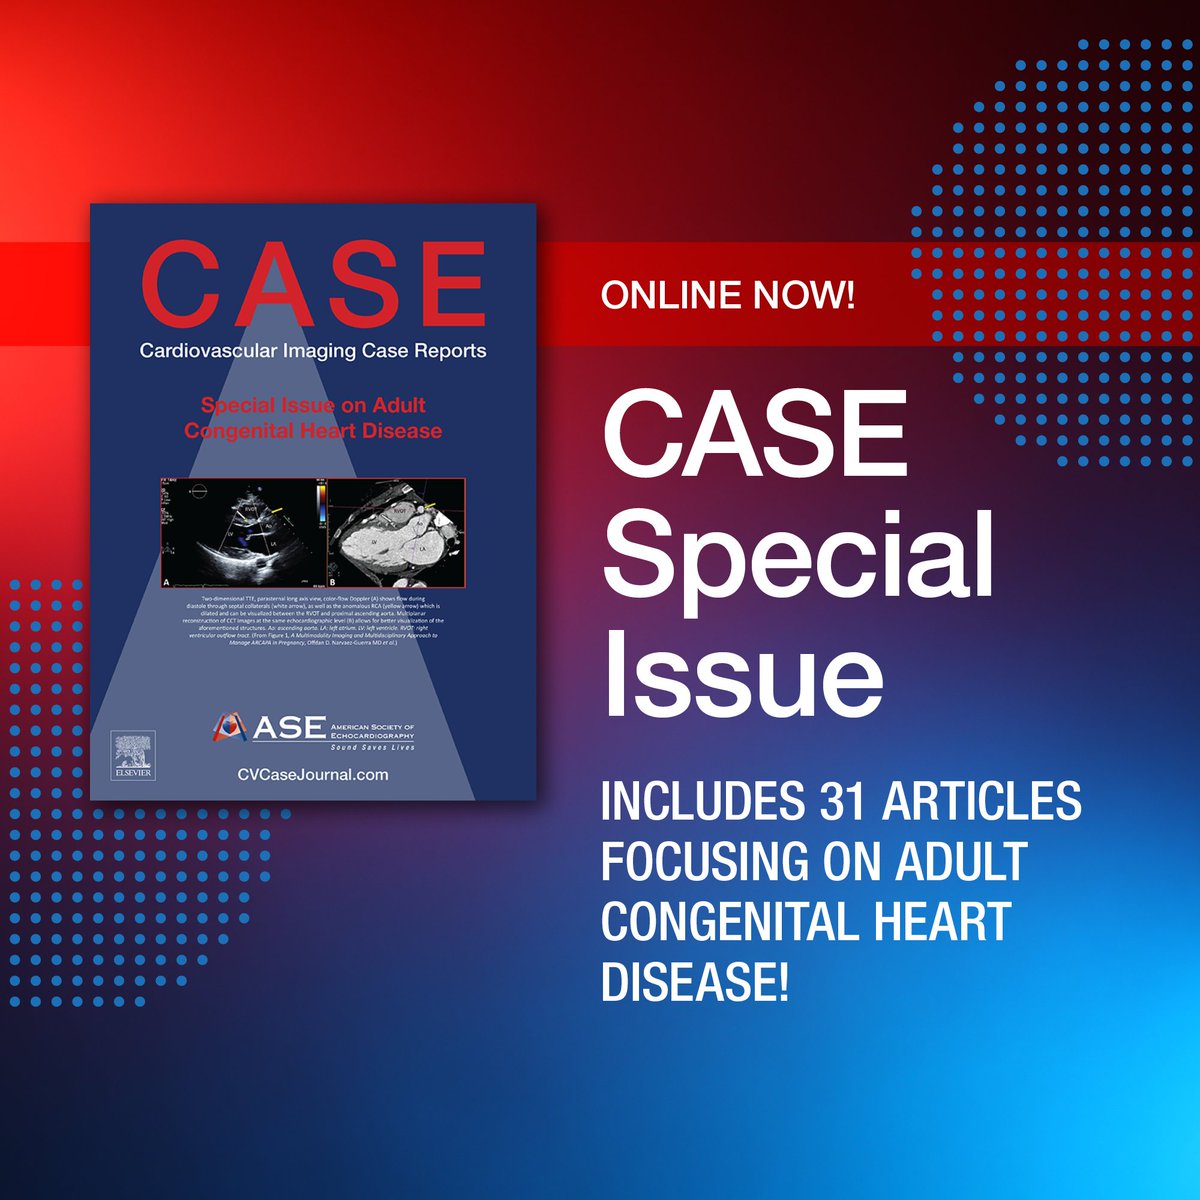 Learn multiple imaging tips and tricks to help guide you when you are confronted with #ACHD patients in the @CASEfromASE #CASESpecialIssue that includes 31 case reports that can be saved as educational currency for future reference. @ASE360 #EchoFirst bit.ly/3v8YvrO